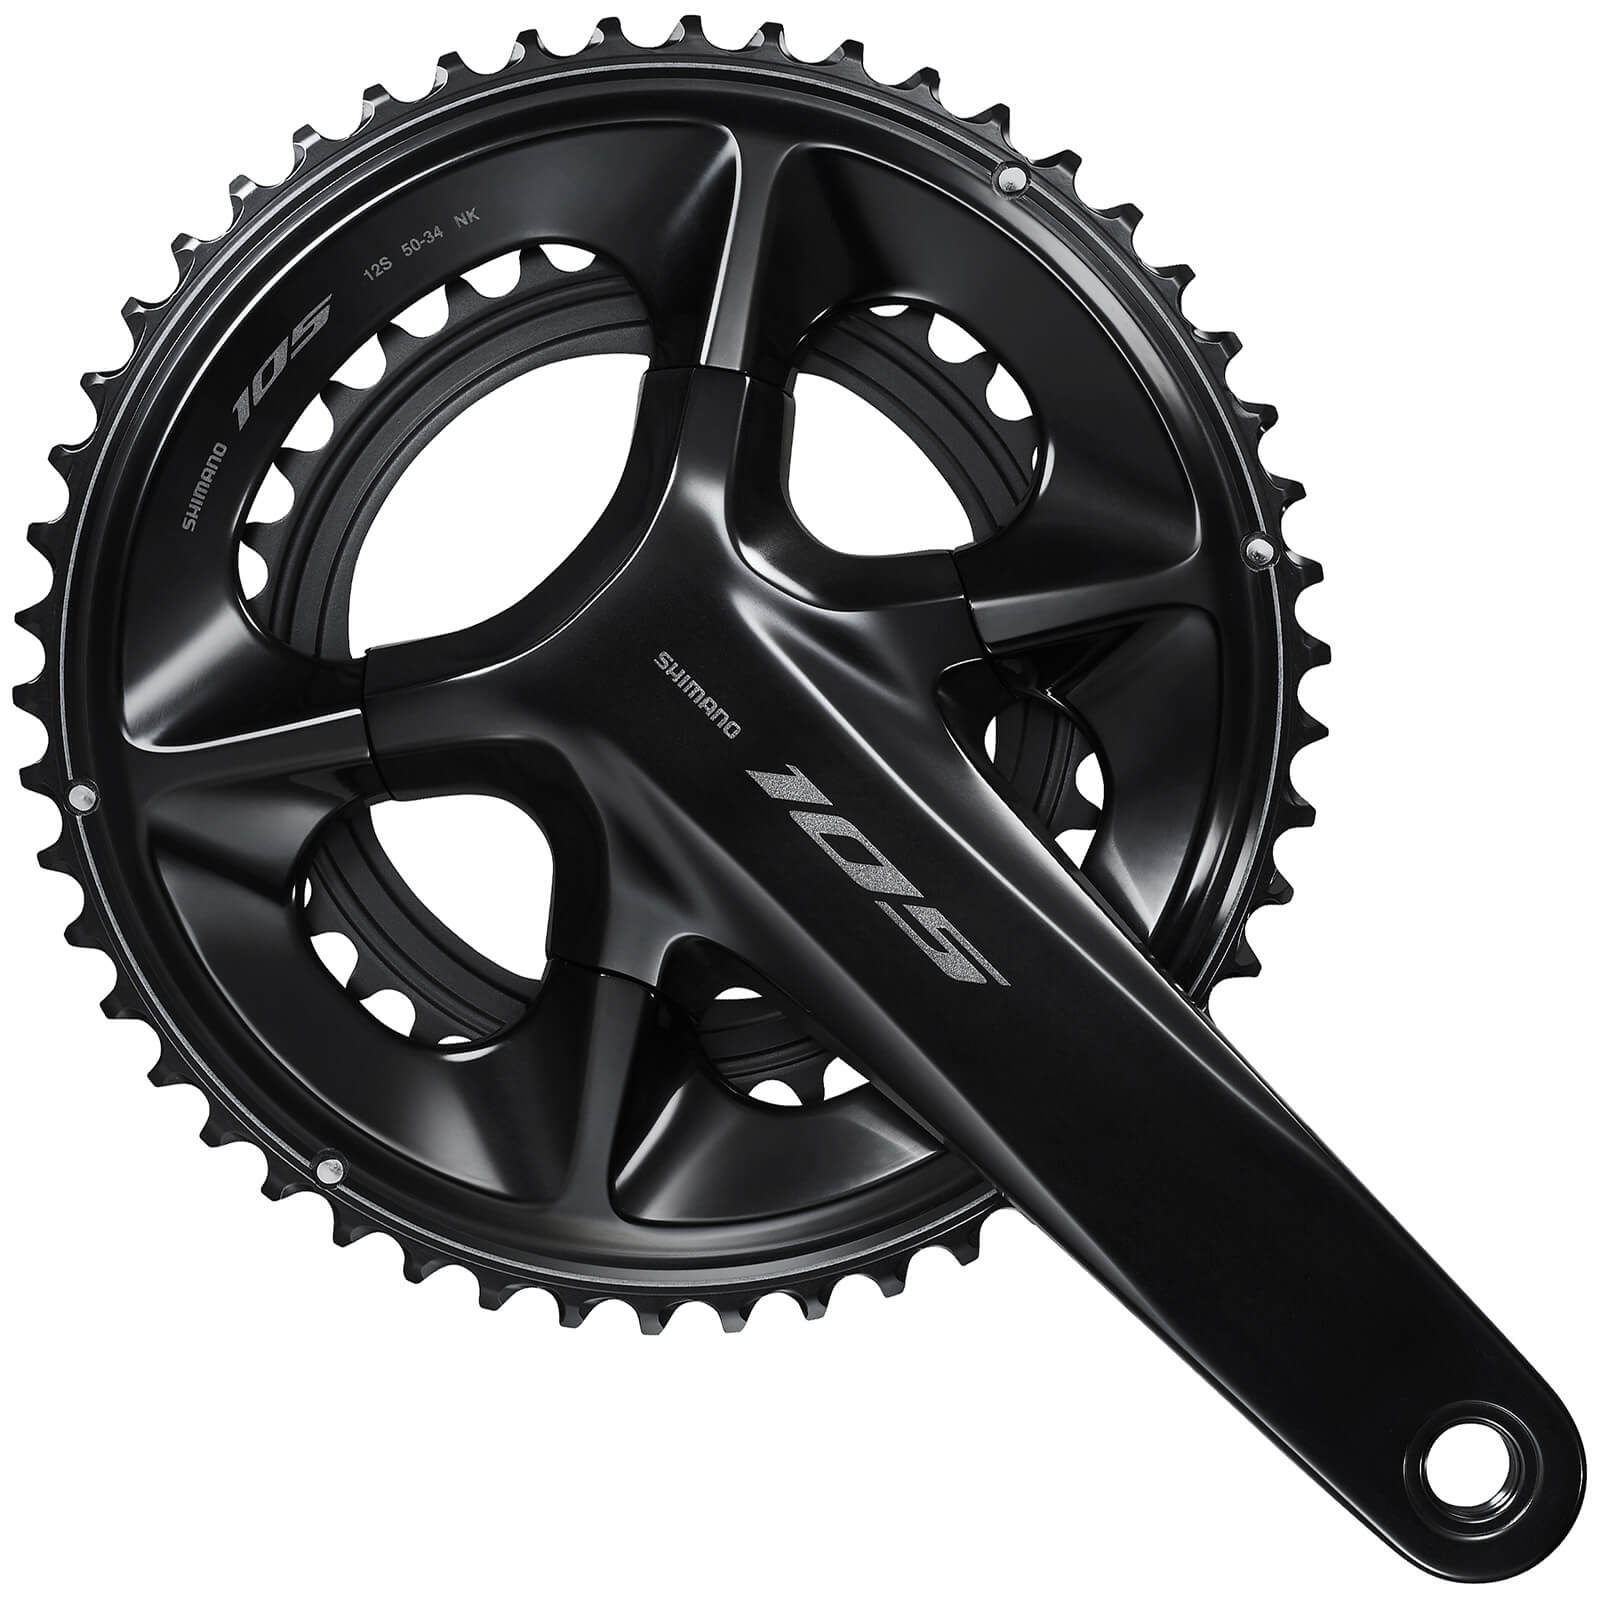 Shimano 105 FC-R7100 12 Speed Chainset - 170mm - 50/34